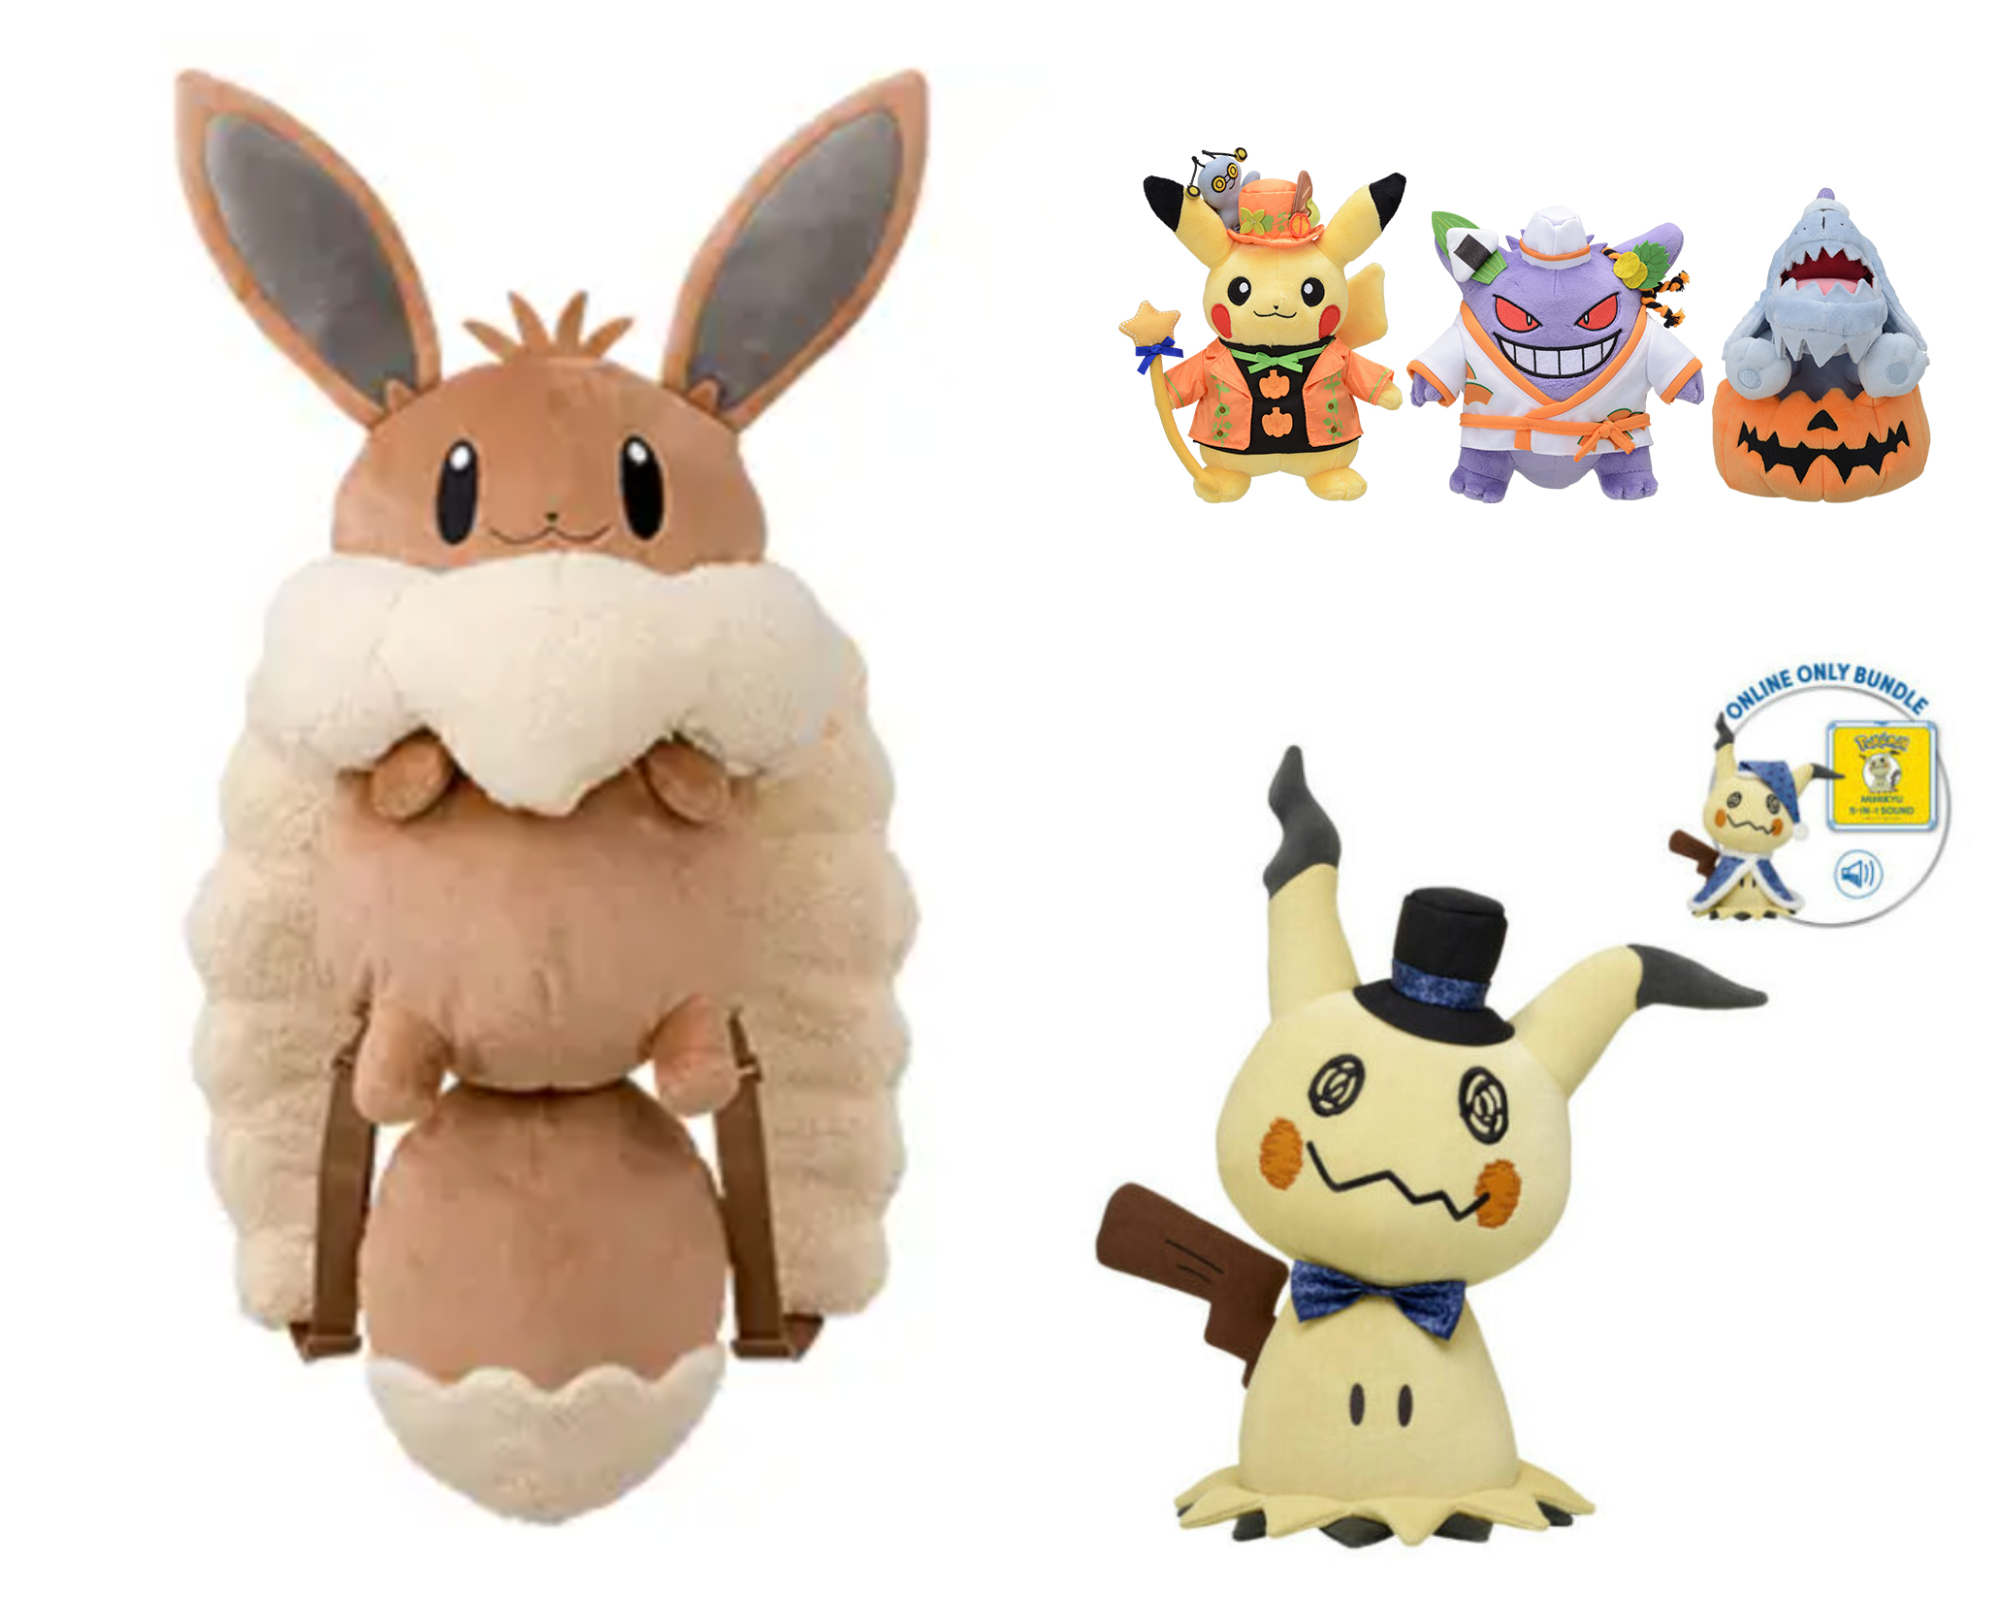 Eevee backpack, Pikachu, Gengar, and Greavard Halloween plushes, and Mimikyu Build-A-Bear plush with top hat and bow tie